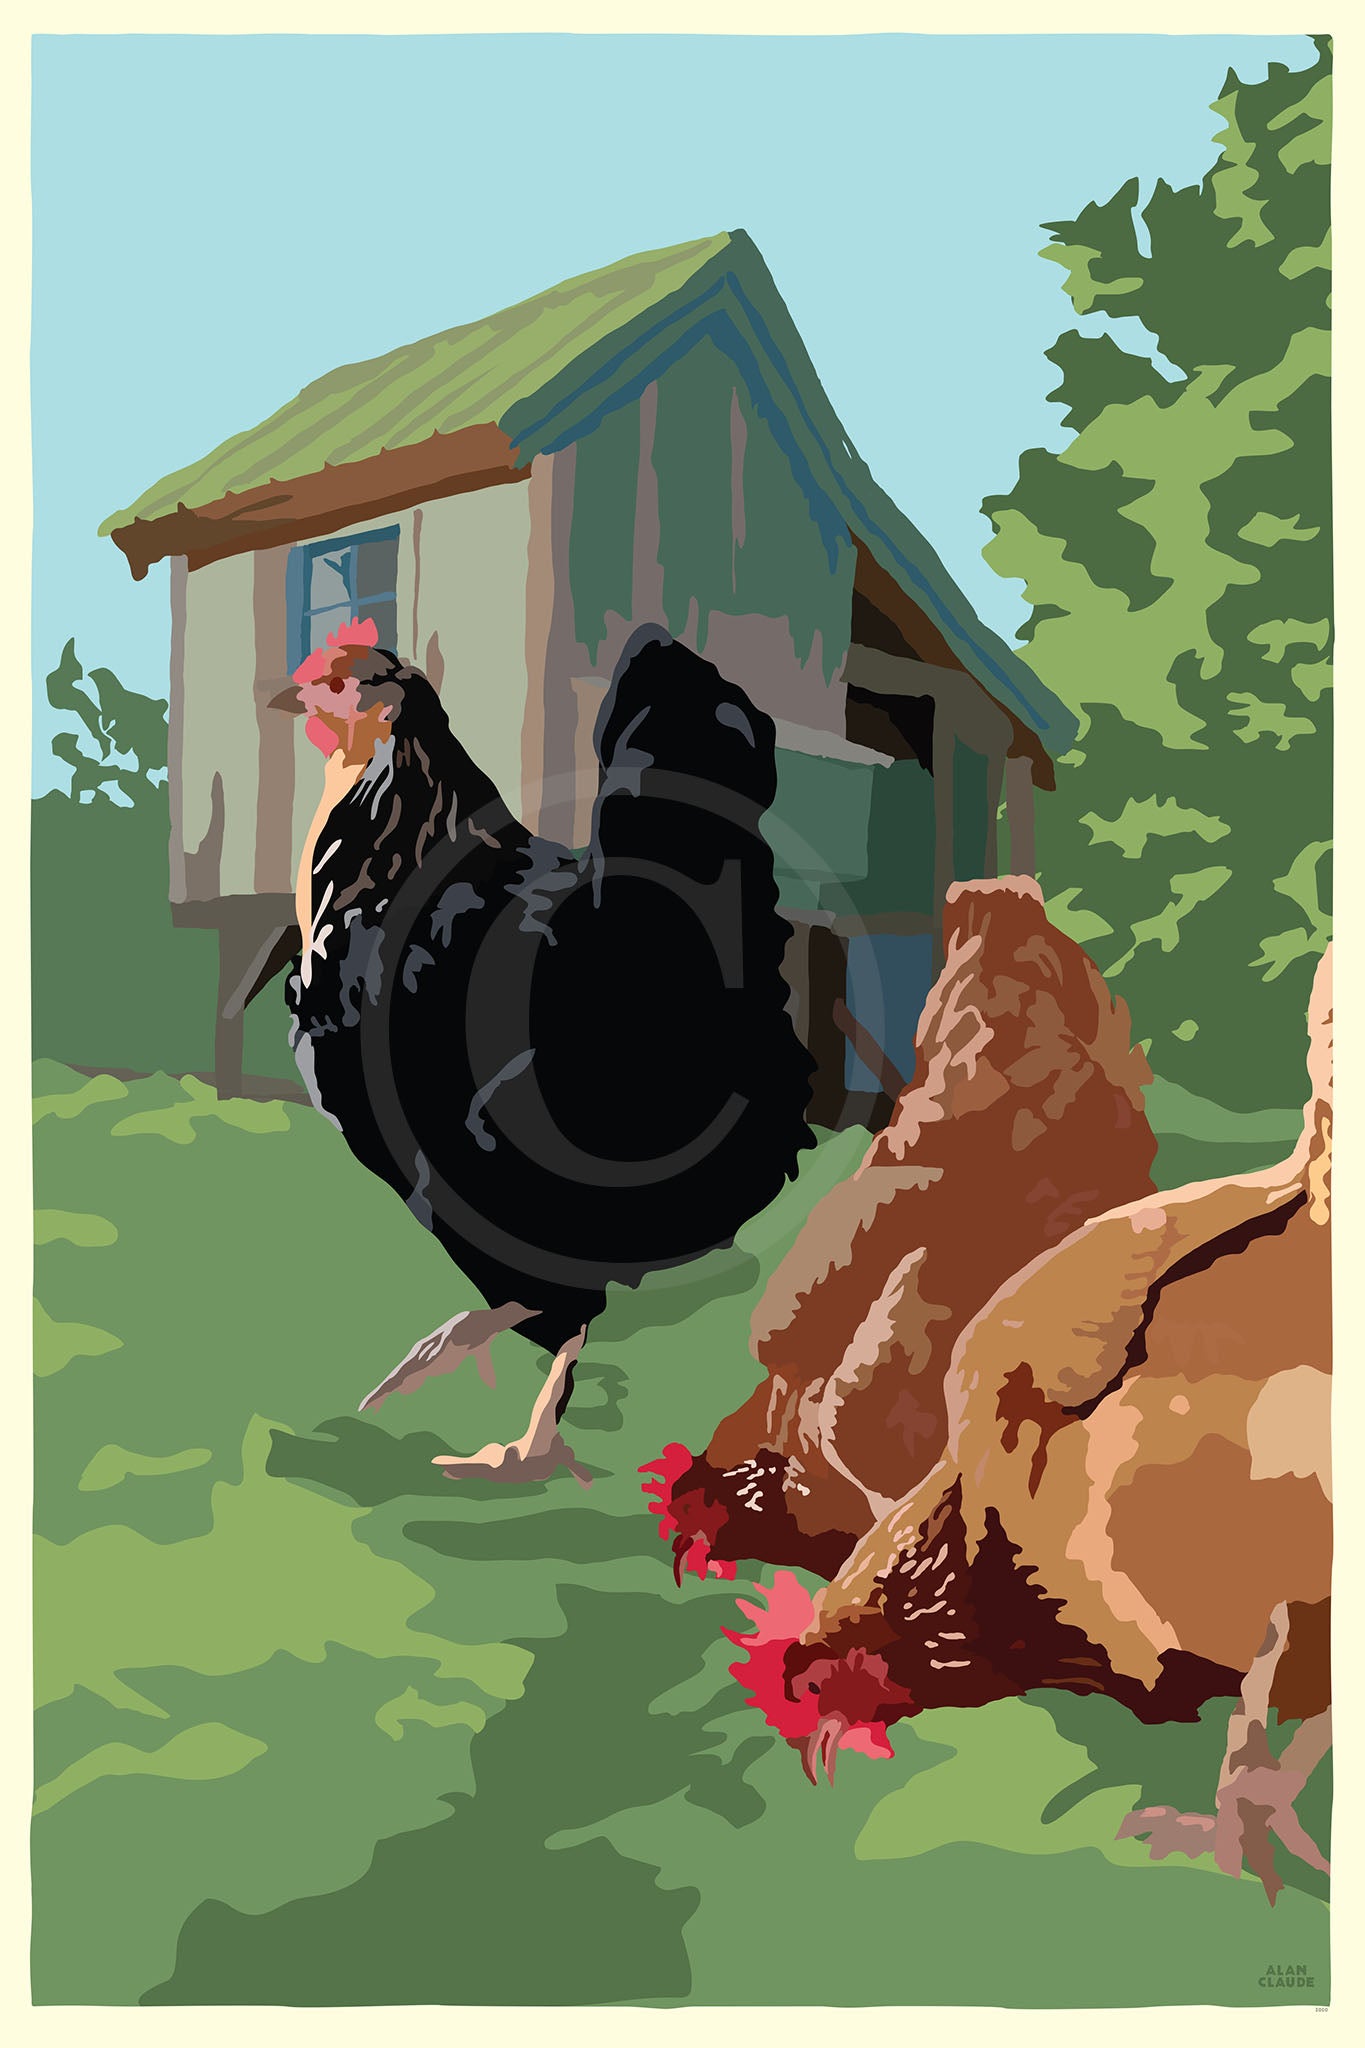 Spring Chickens Art Print 36" x 53" Wall Poster By Alan Claude - Maine